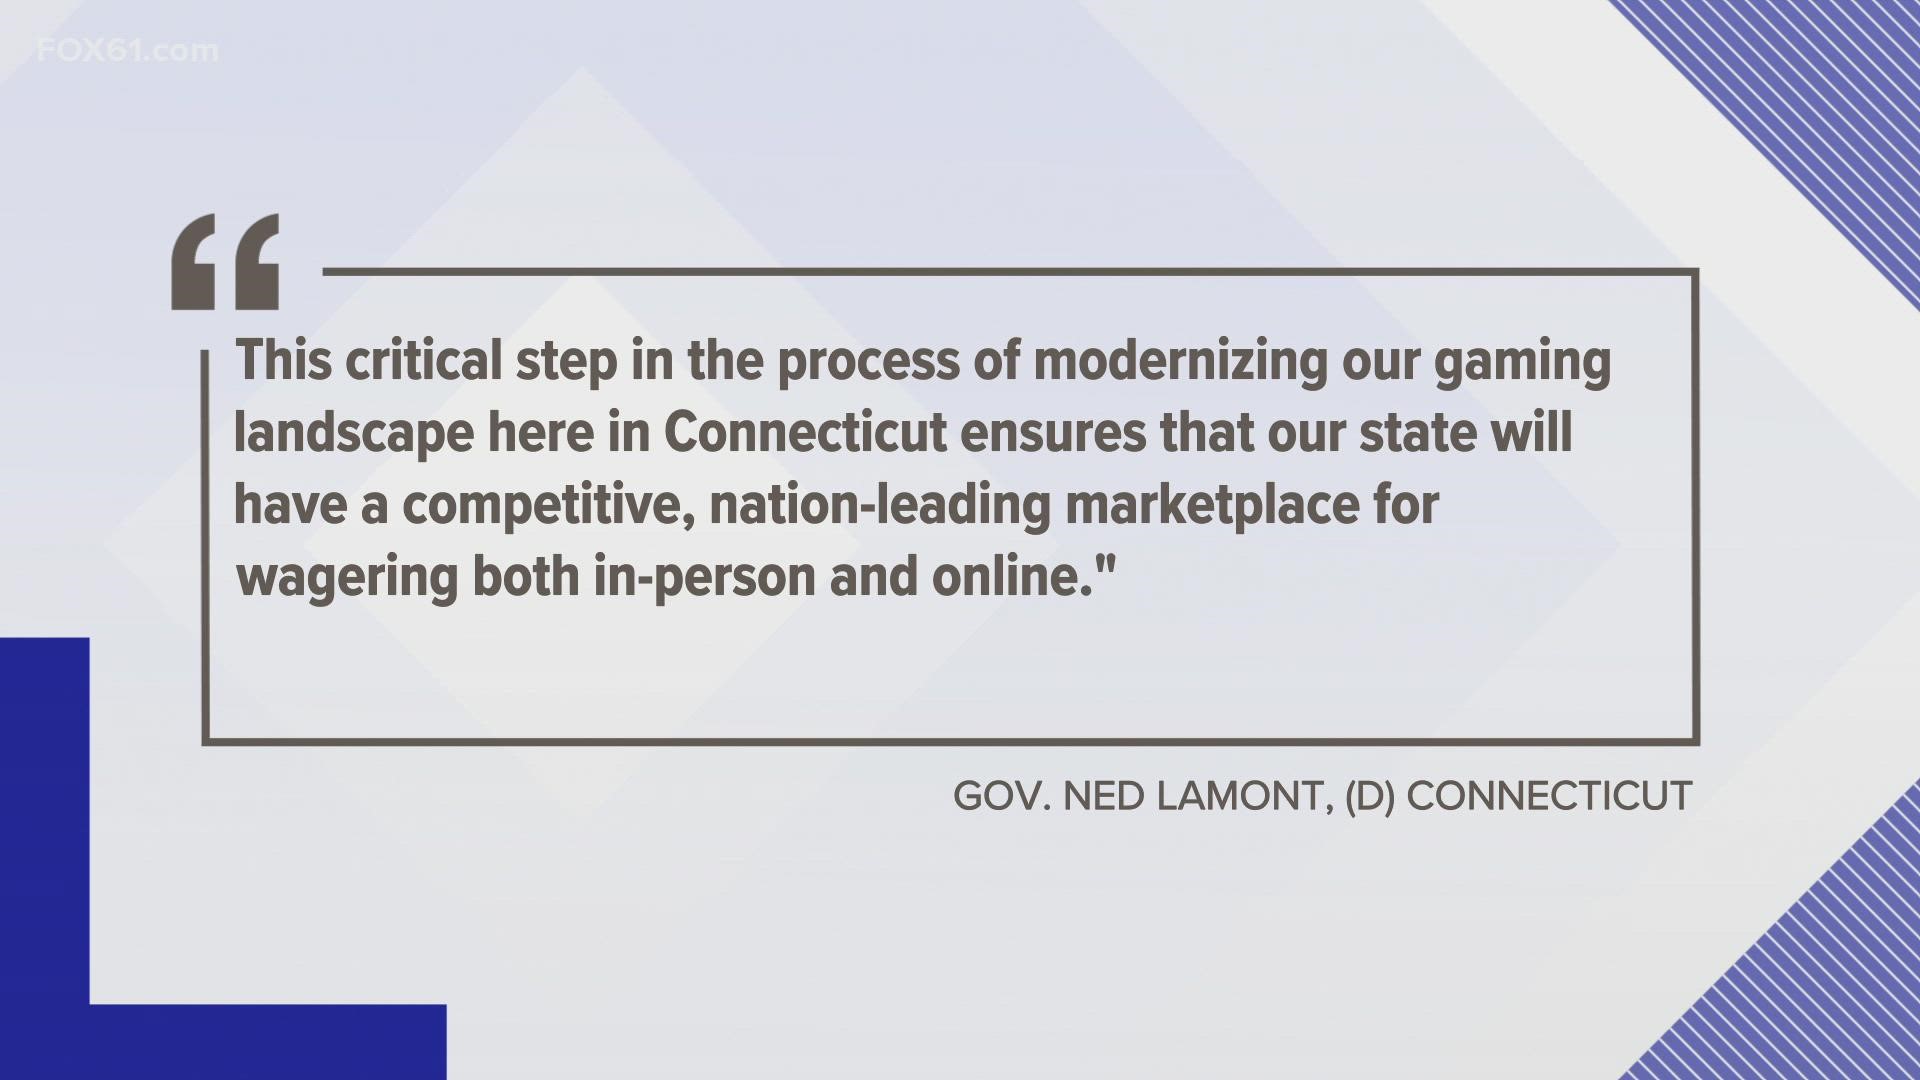 It puts the state on the cusp of providing a modern, technologically advanced gaming experience competitive with our neighboring states, Lamont said.